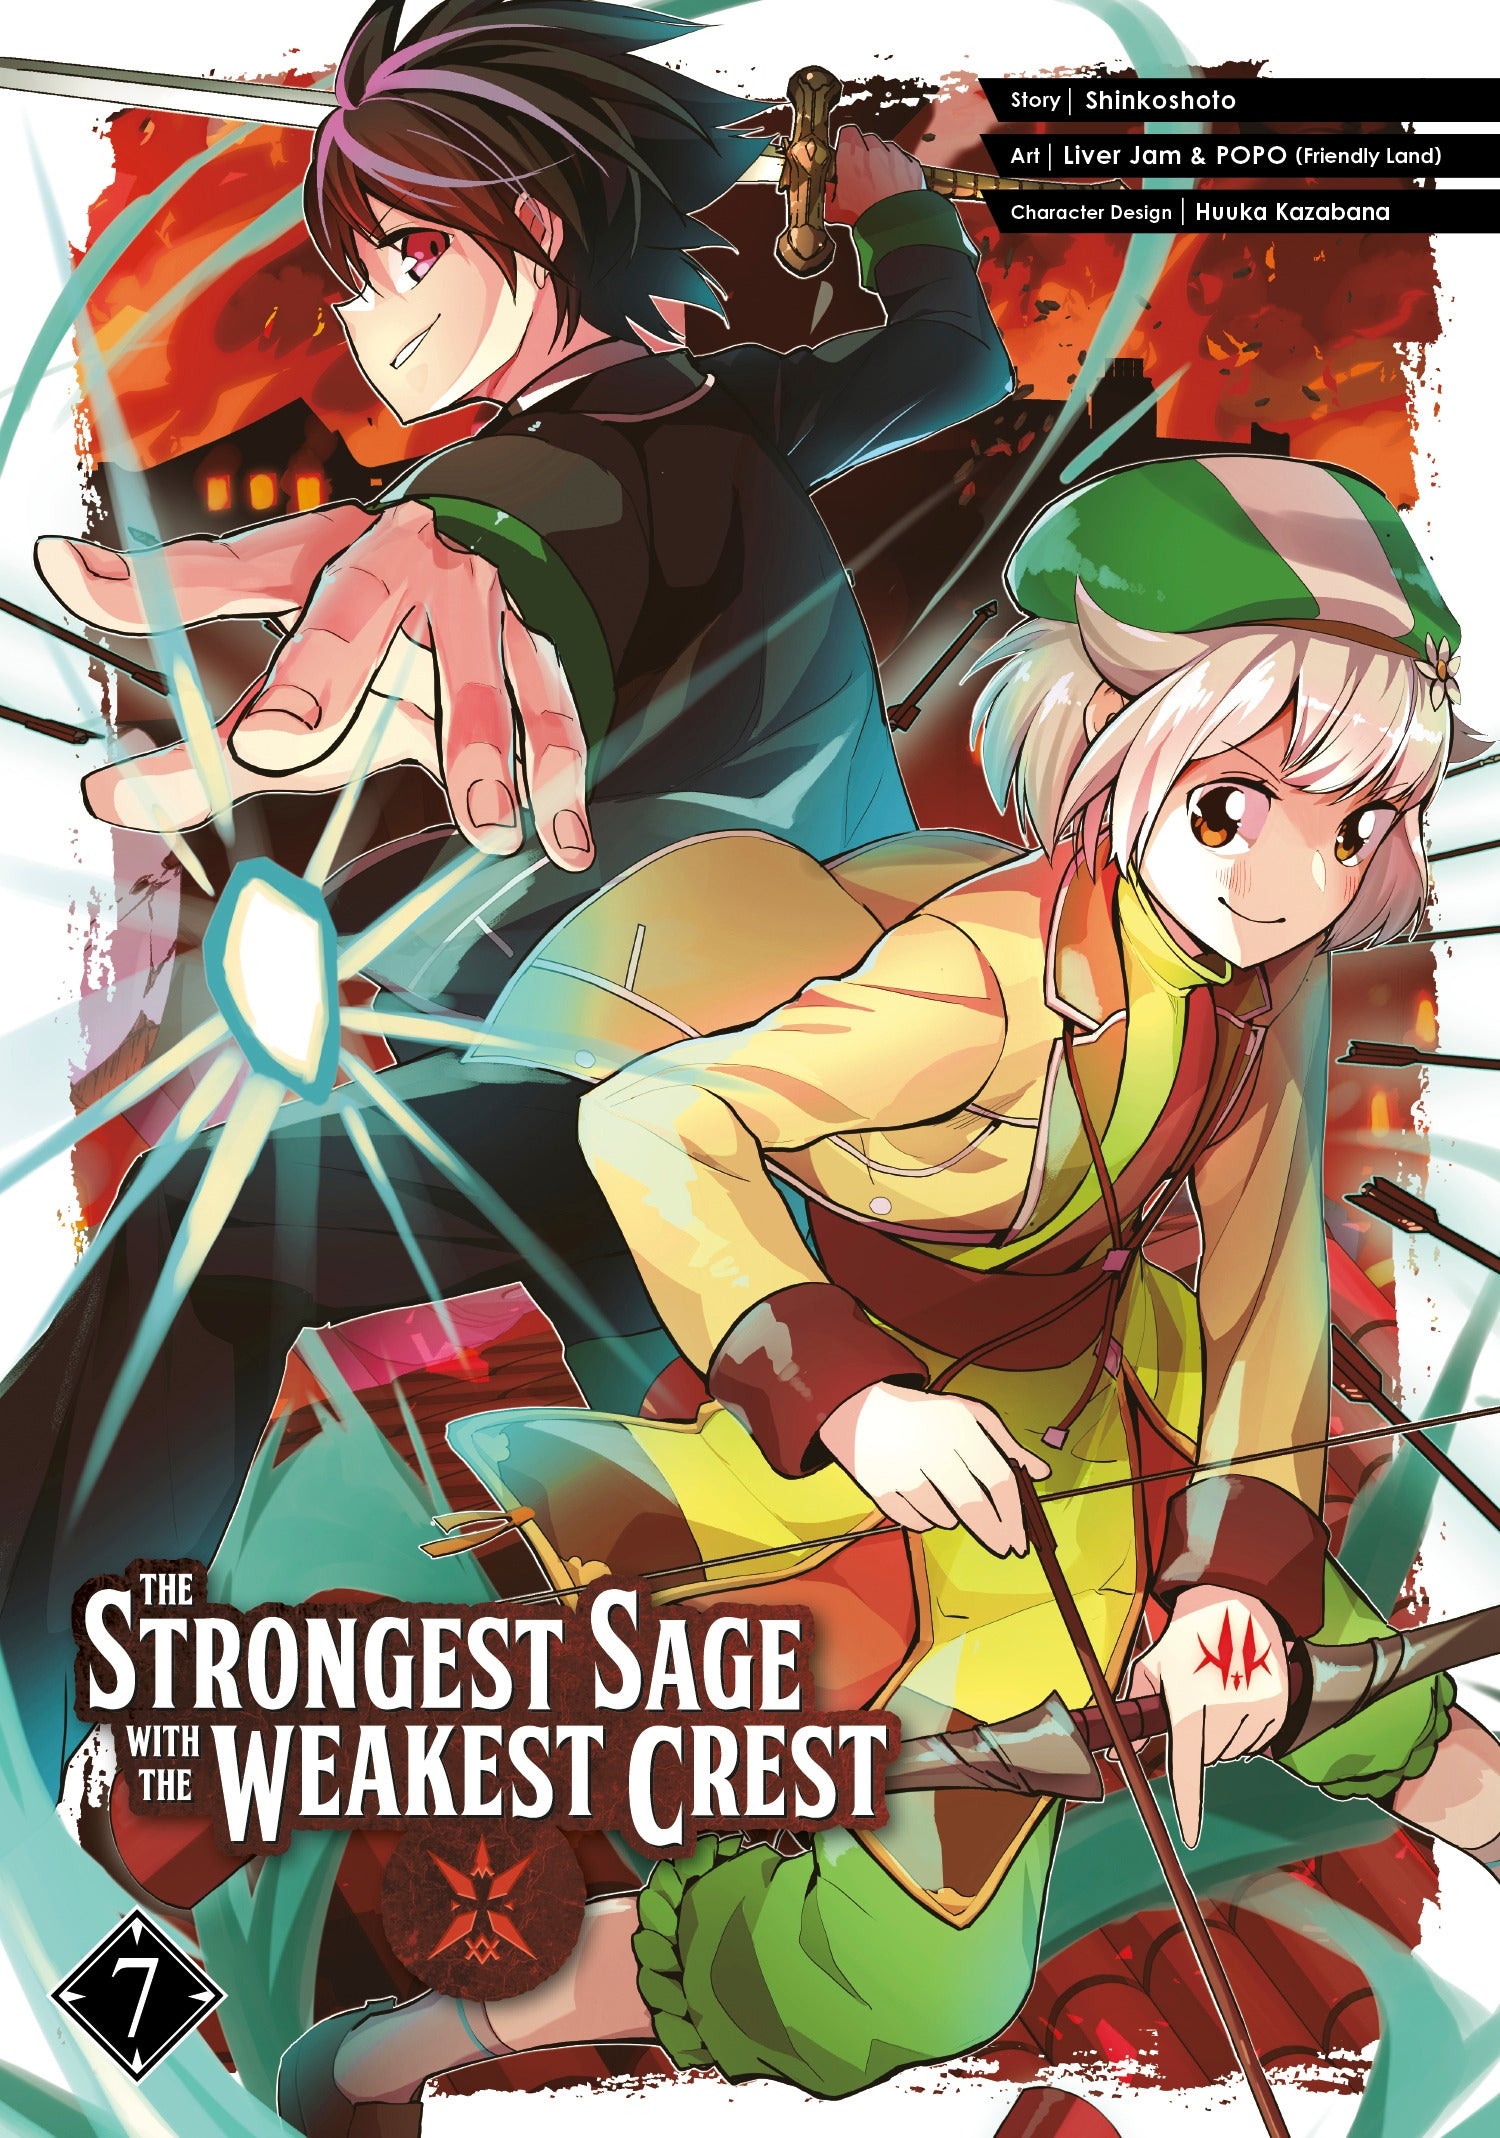 The Strongest Sage with the Weakest Crest 07 - Manga Warehouse